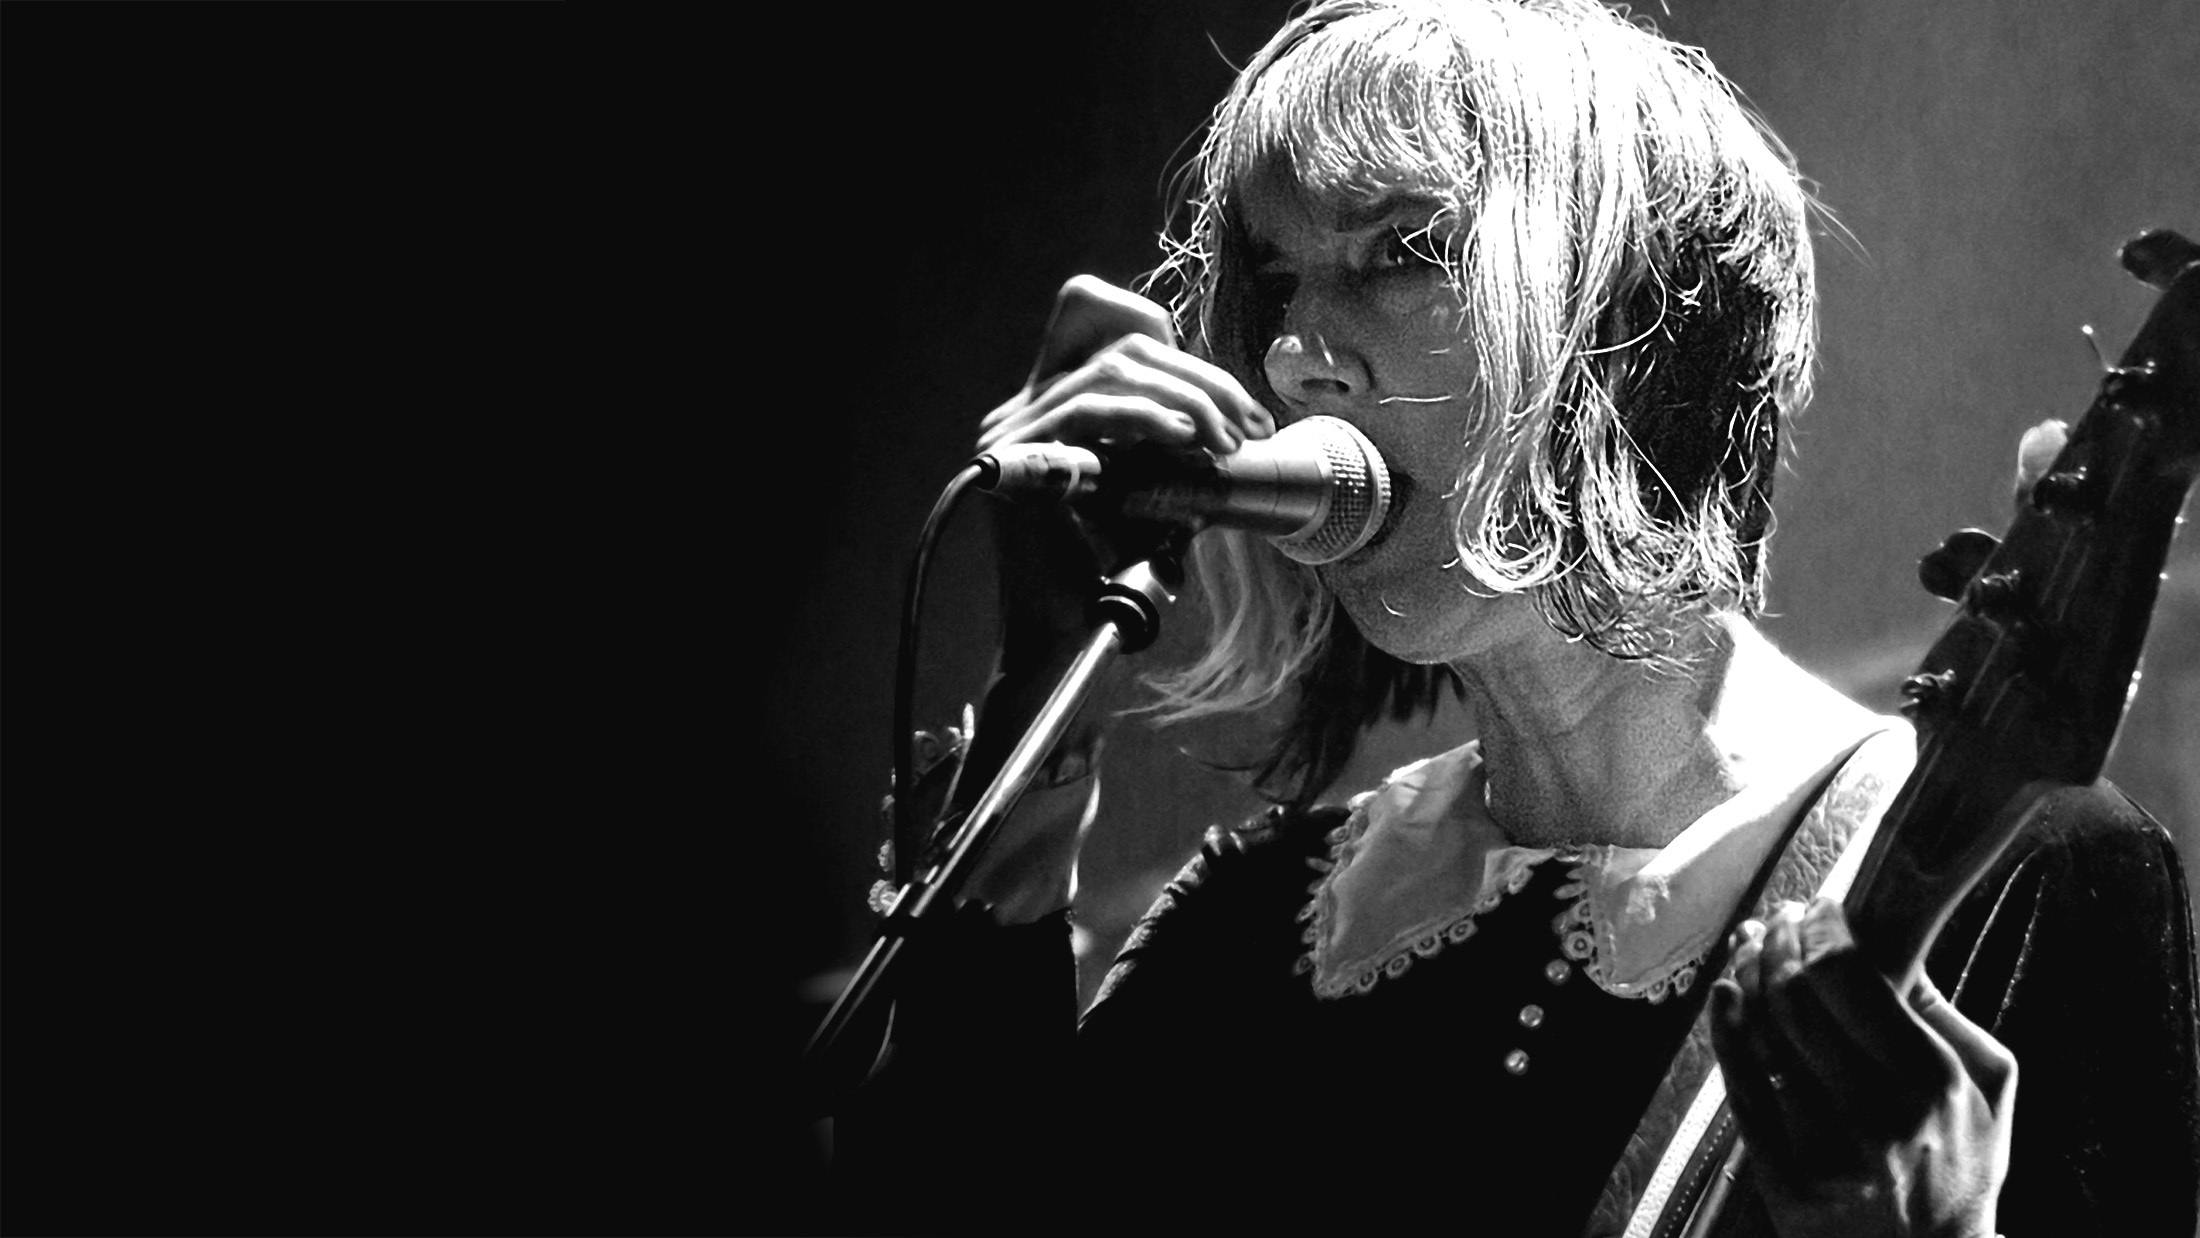 Kim Shattuck, Singer And Guitarist Of The Muffs, Has Died At 56